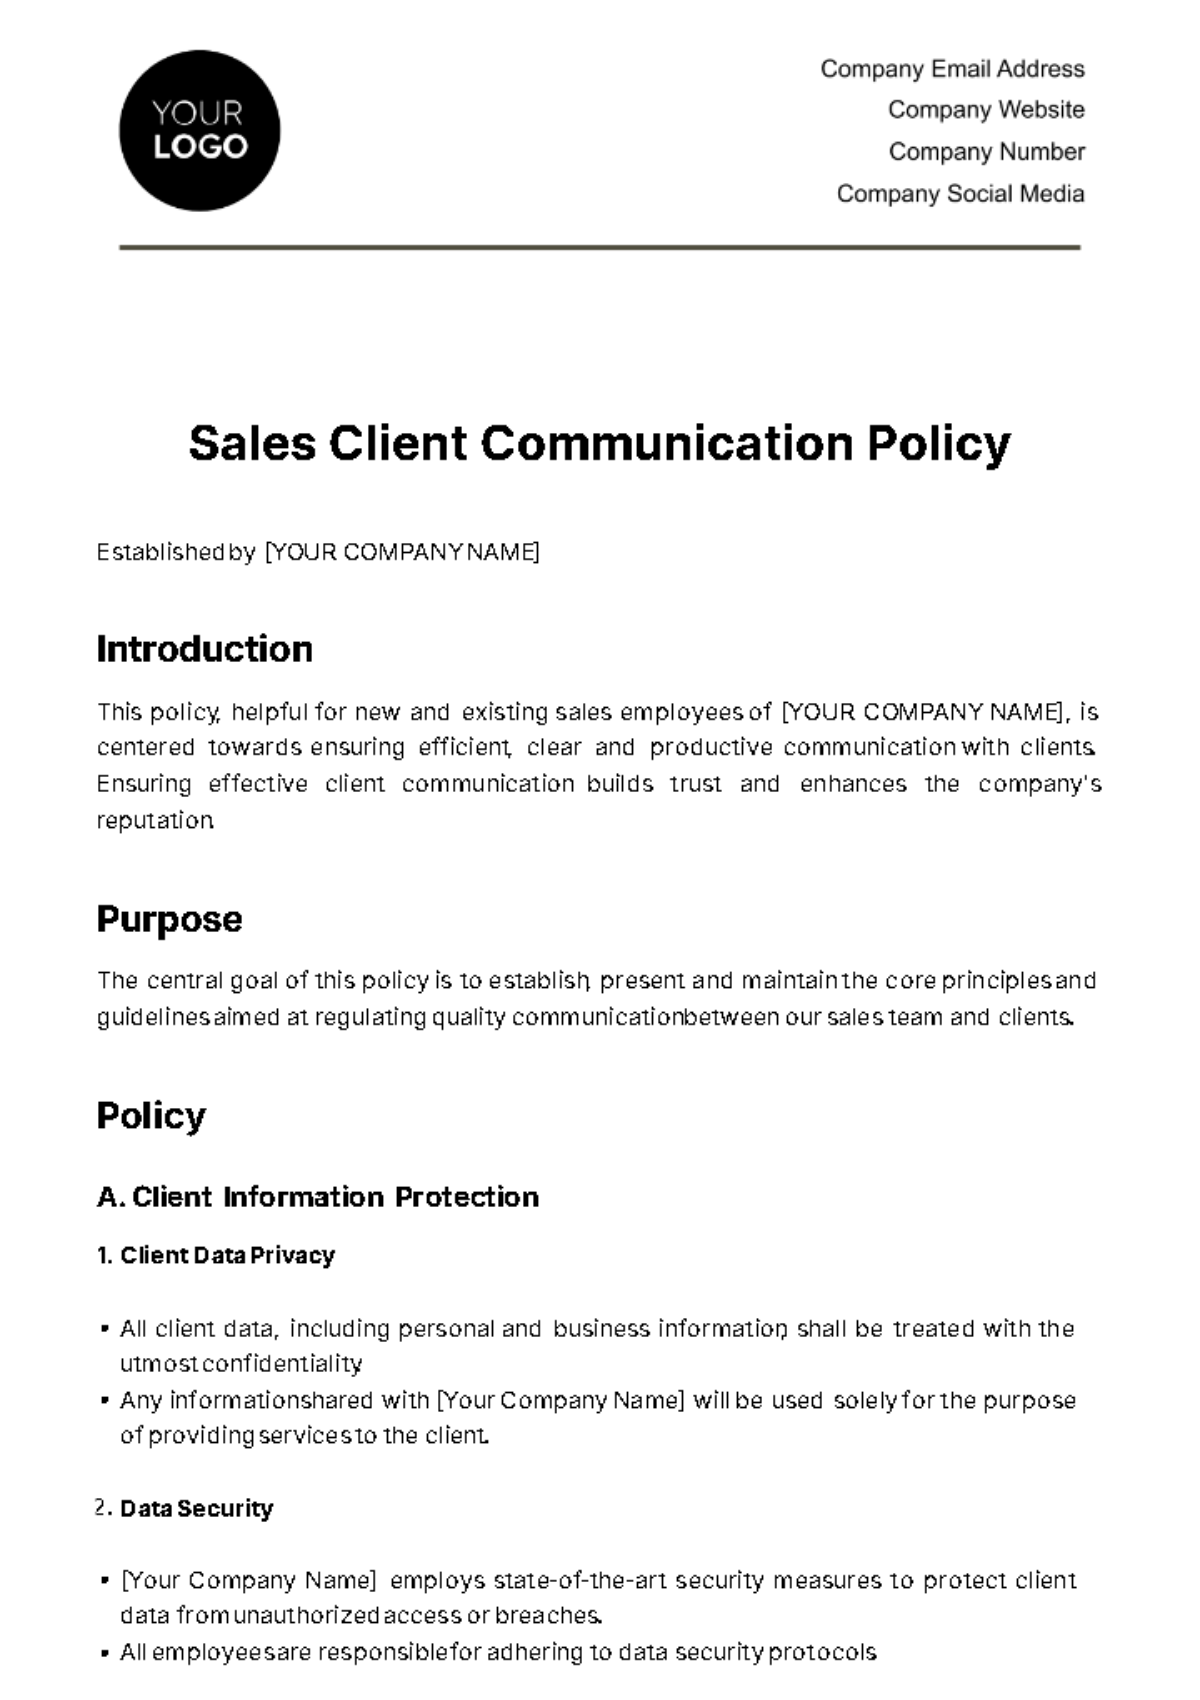 Free Sales Client Communication Policy Template